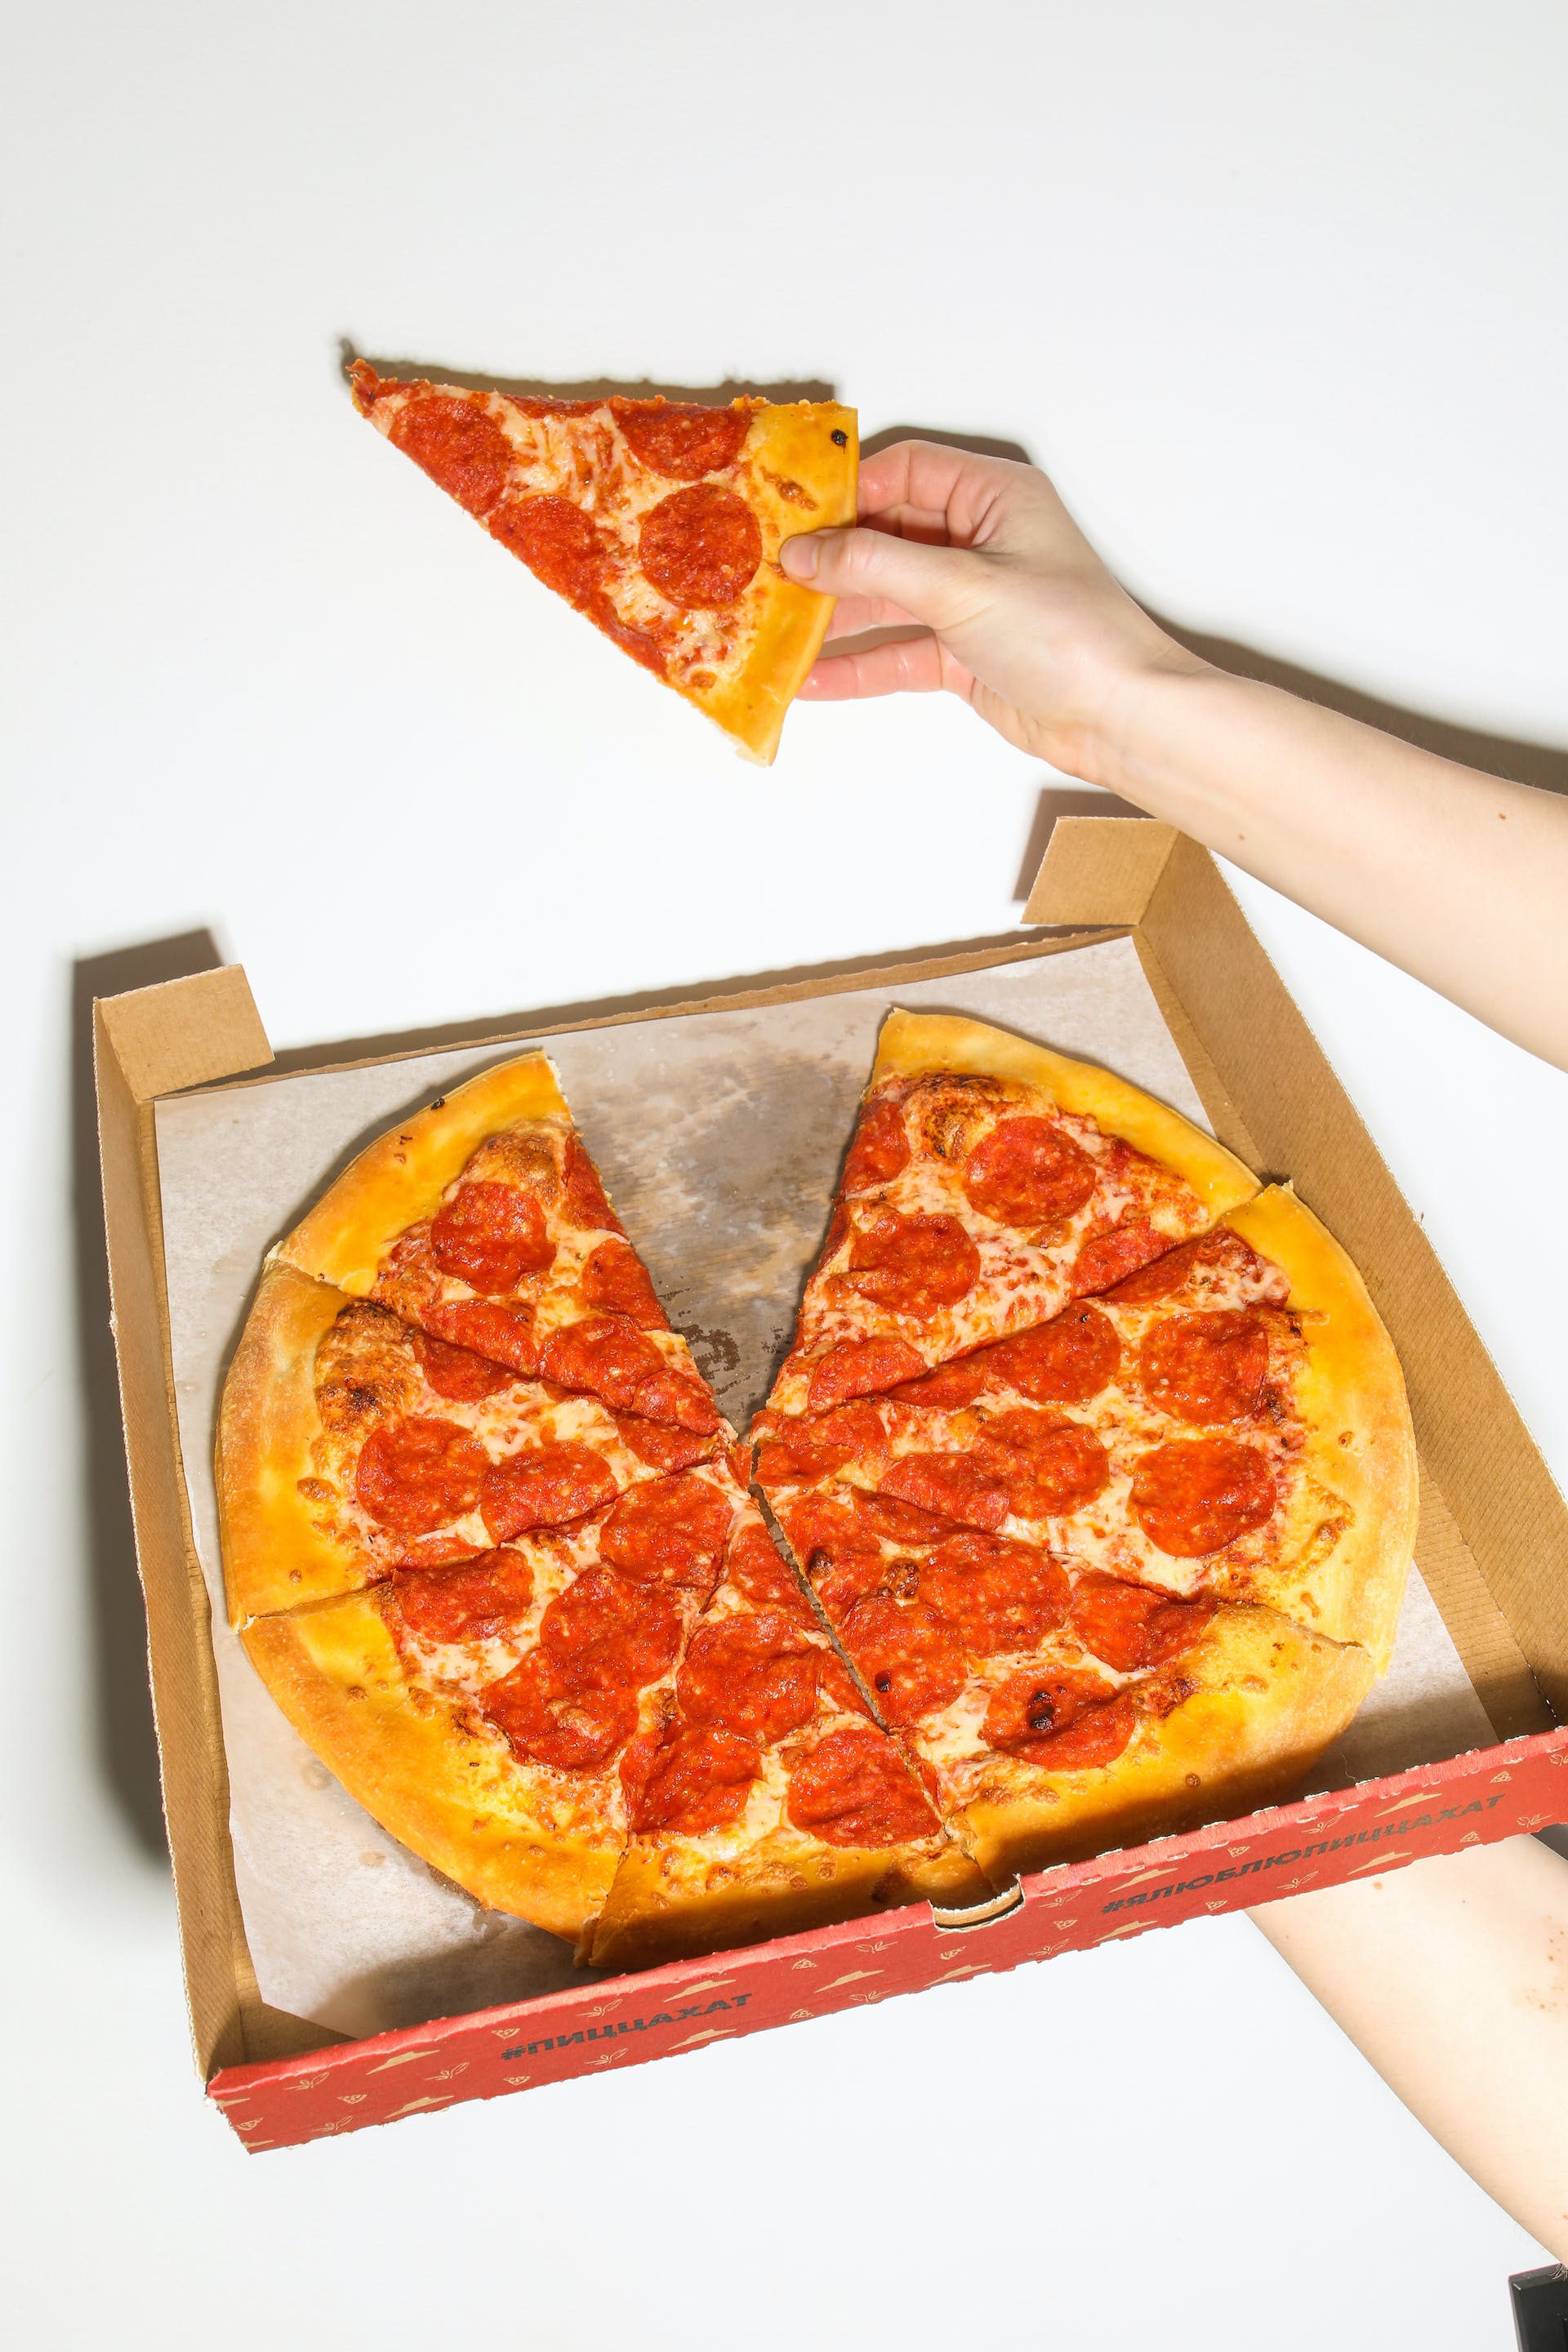 A person holding a pizza slice and a box of pizza | Source: Pexels